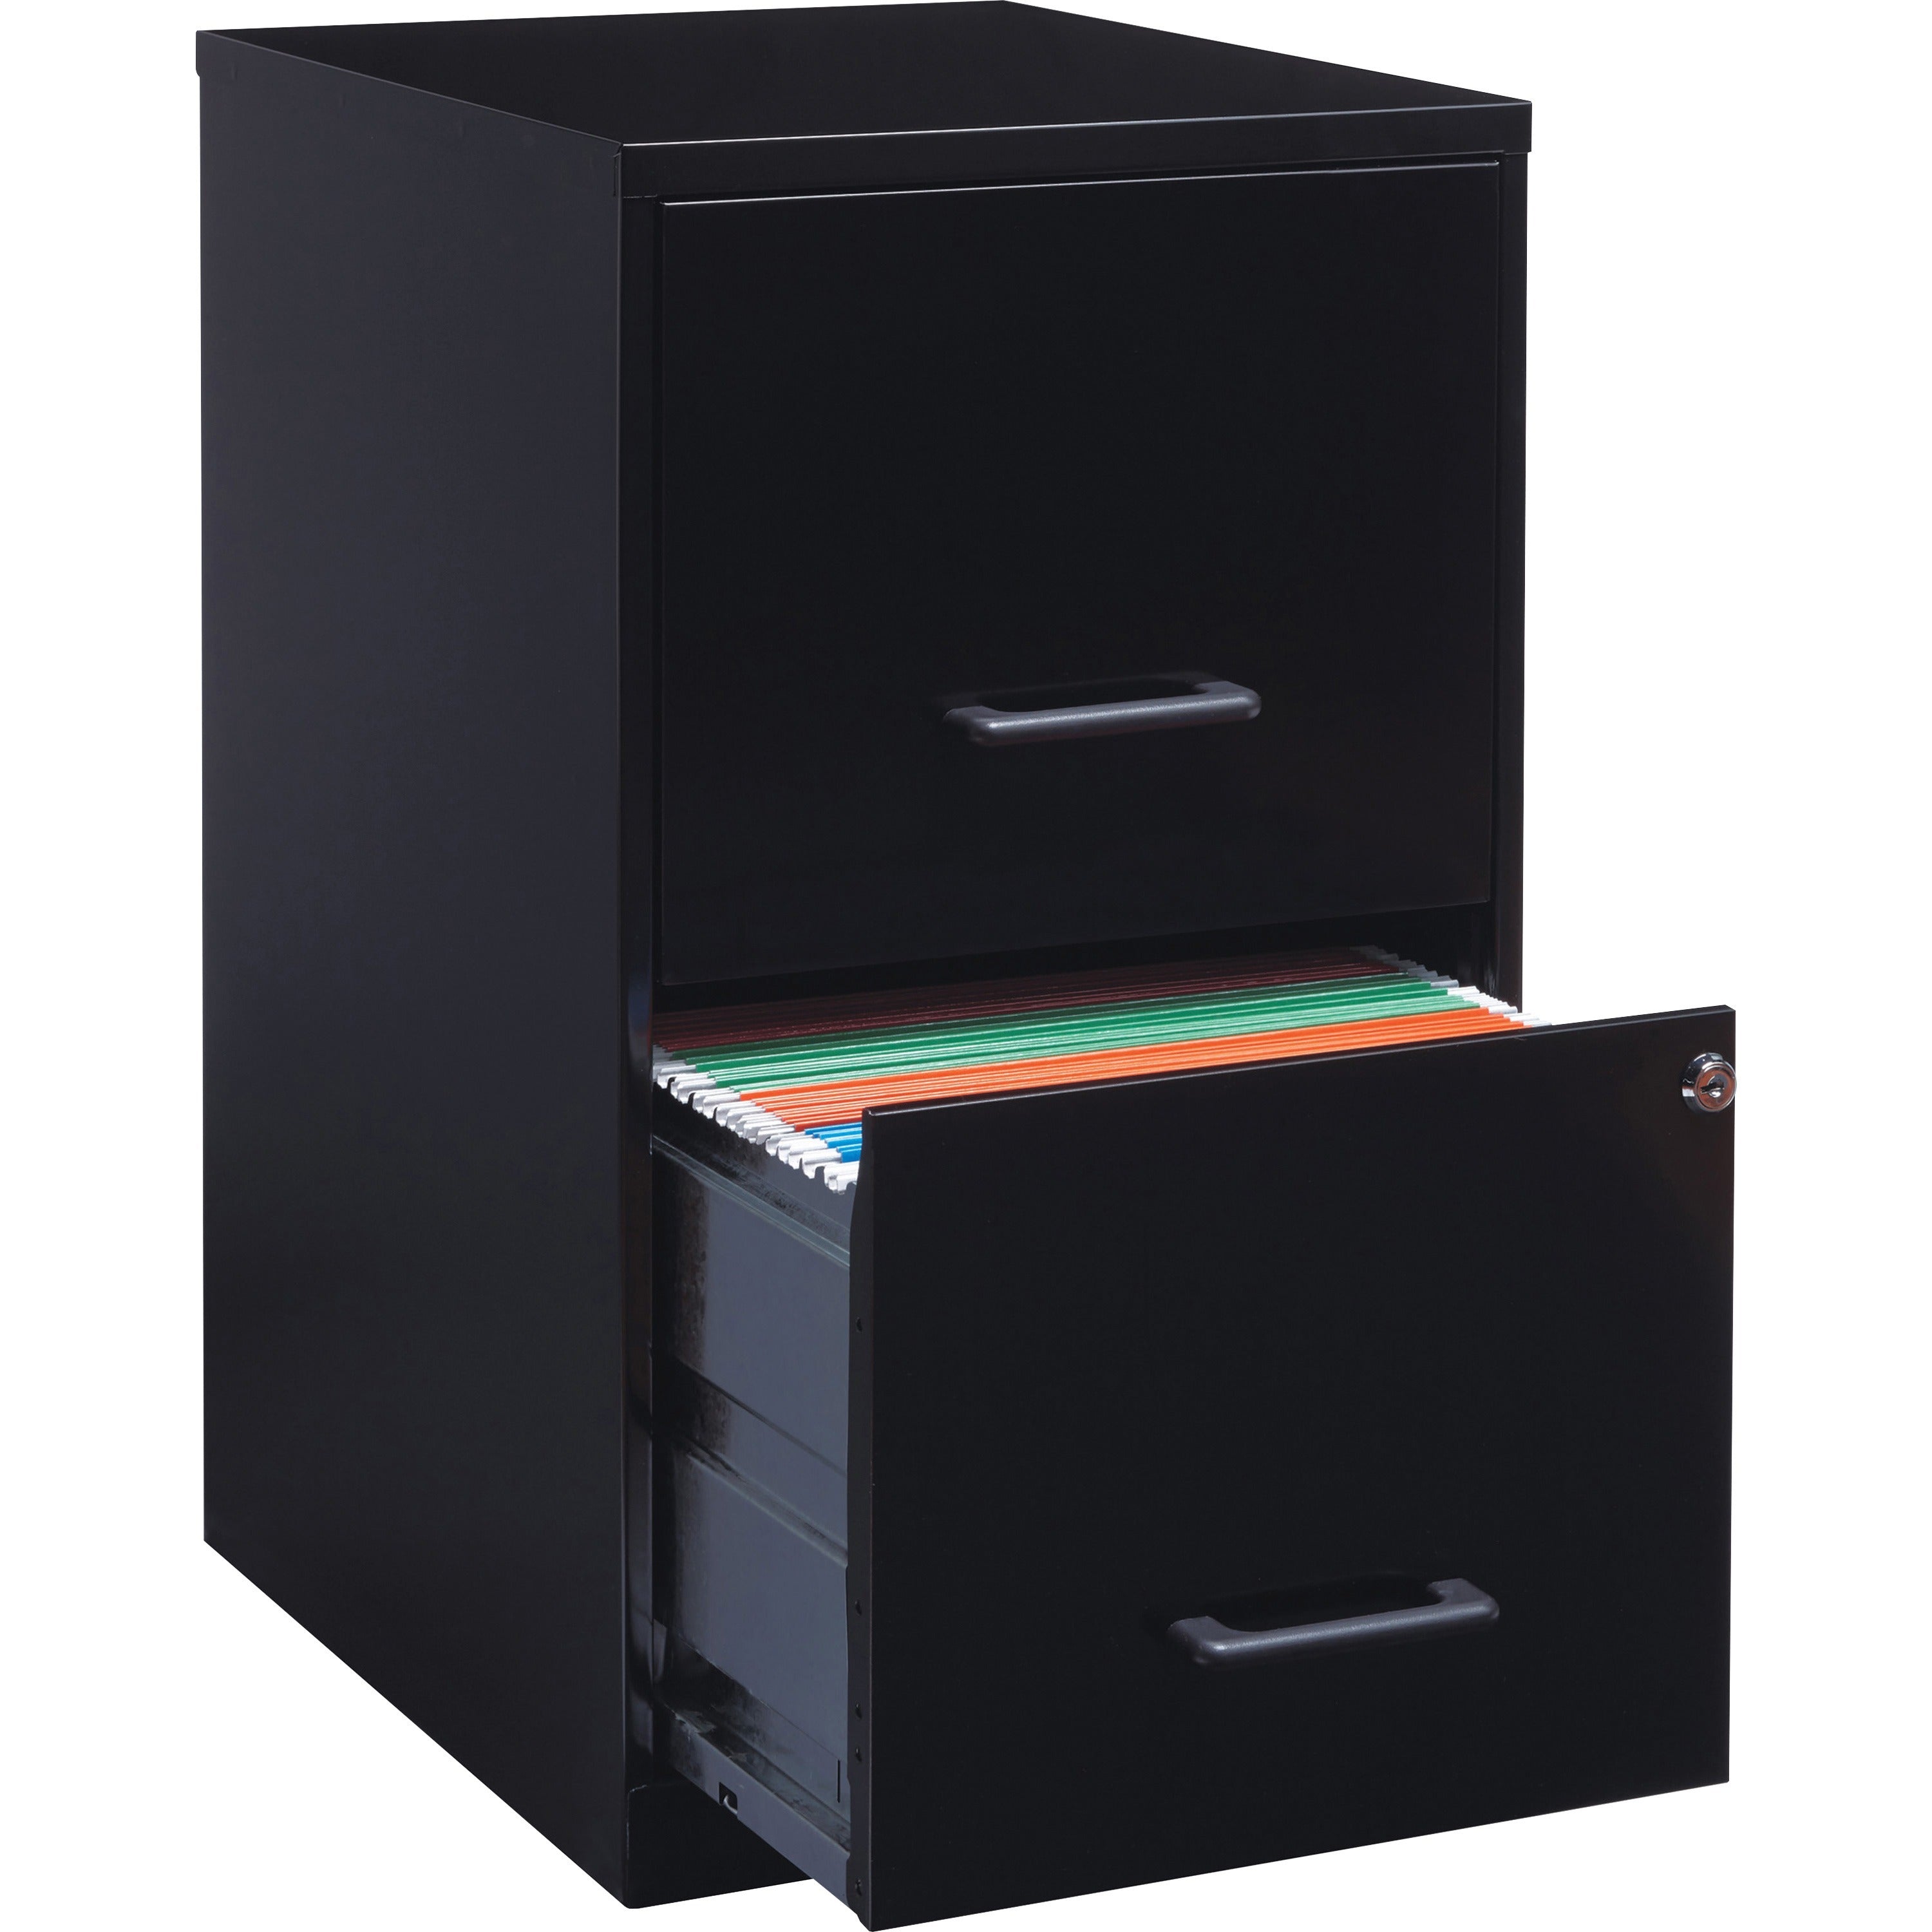 nusparc-file-cabinet-142-x-18-x-245-2-x-drawers-for-file-letter-vertical-locking-drawer-glide-suspension-nonporous-surface-black-baked-enamel-steel-recycled_nprvf218aabk - 1